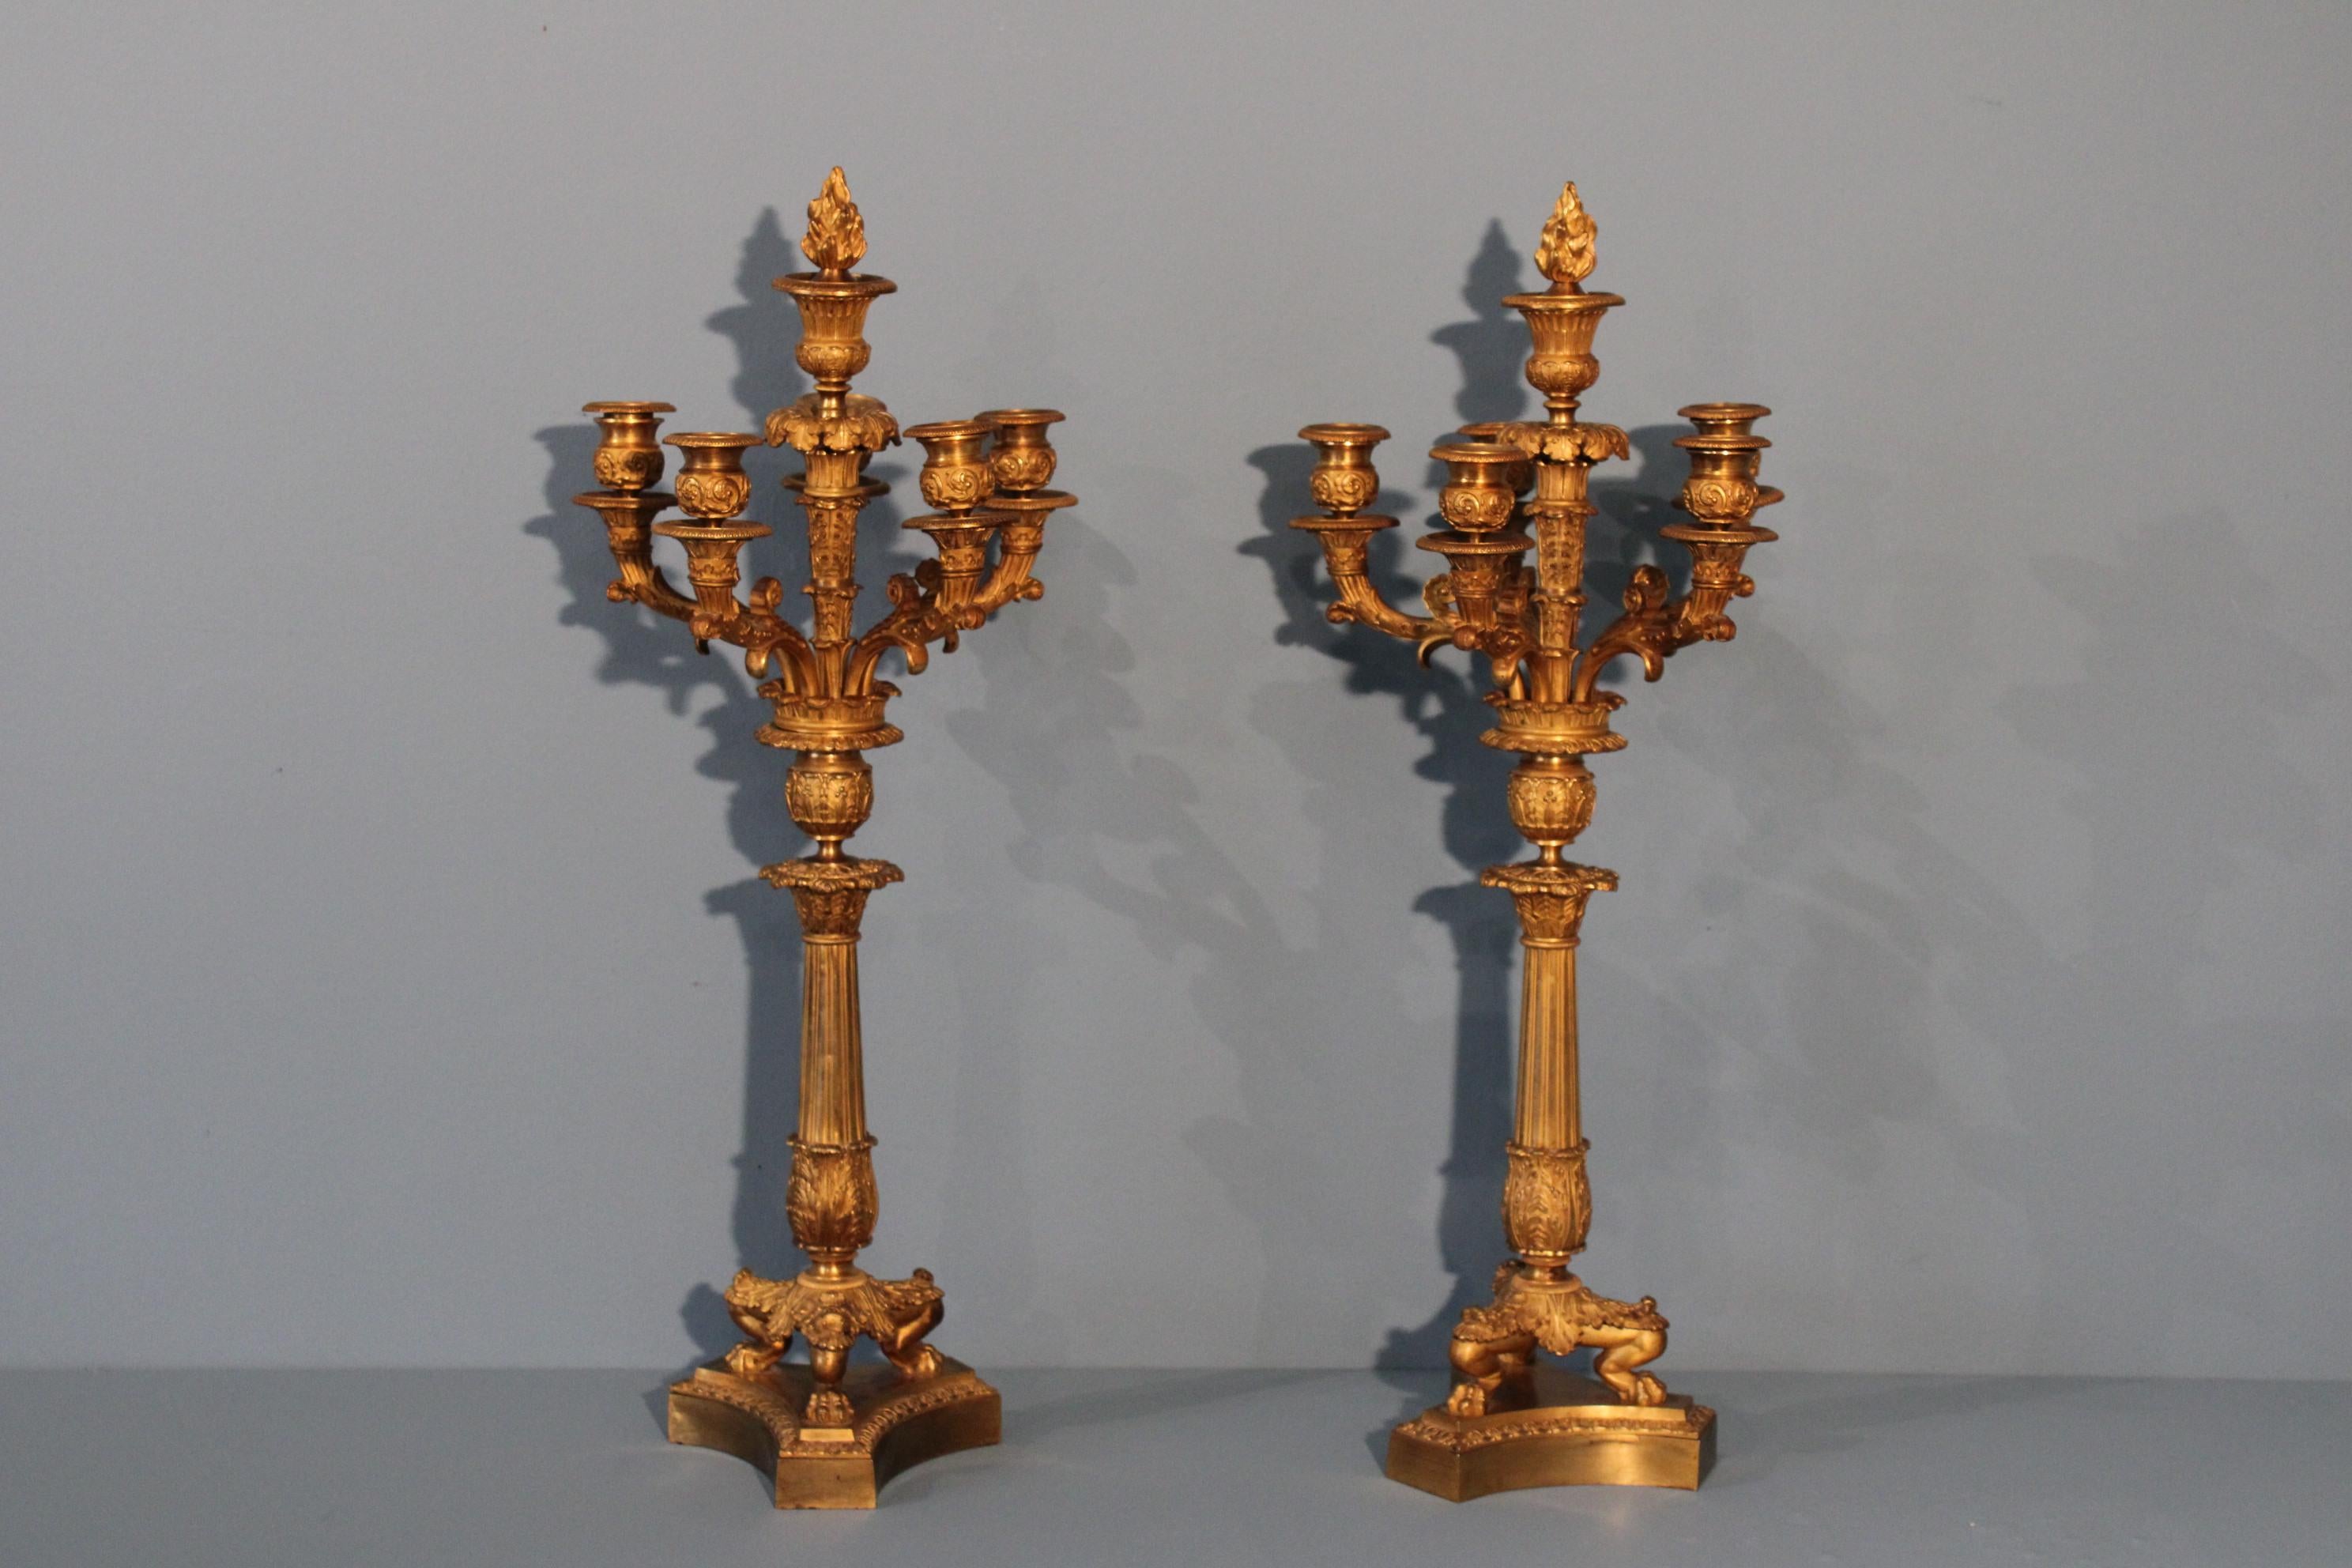 Pair of candlesticks in gilded bronze, Restauration period in France.